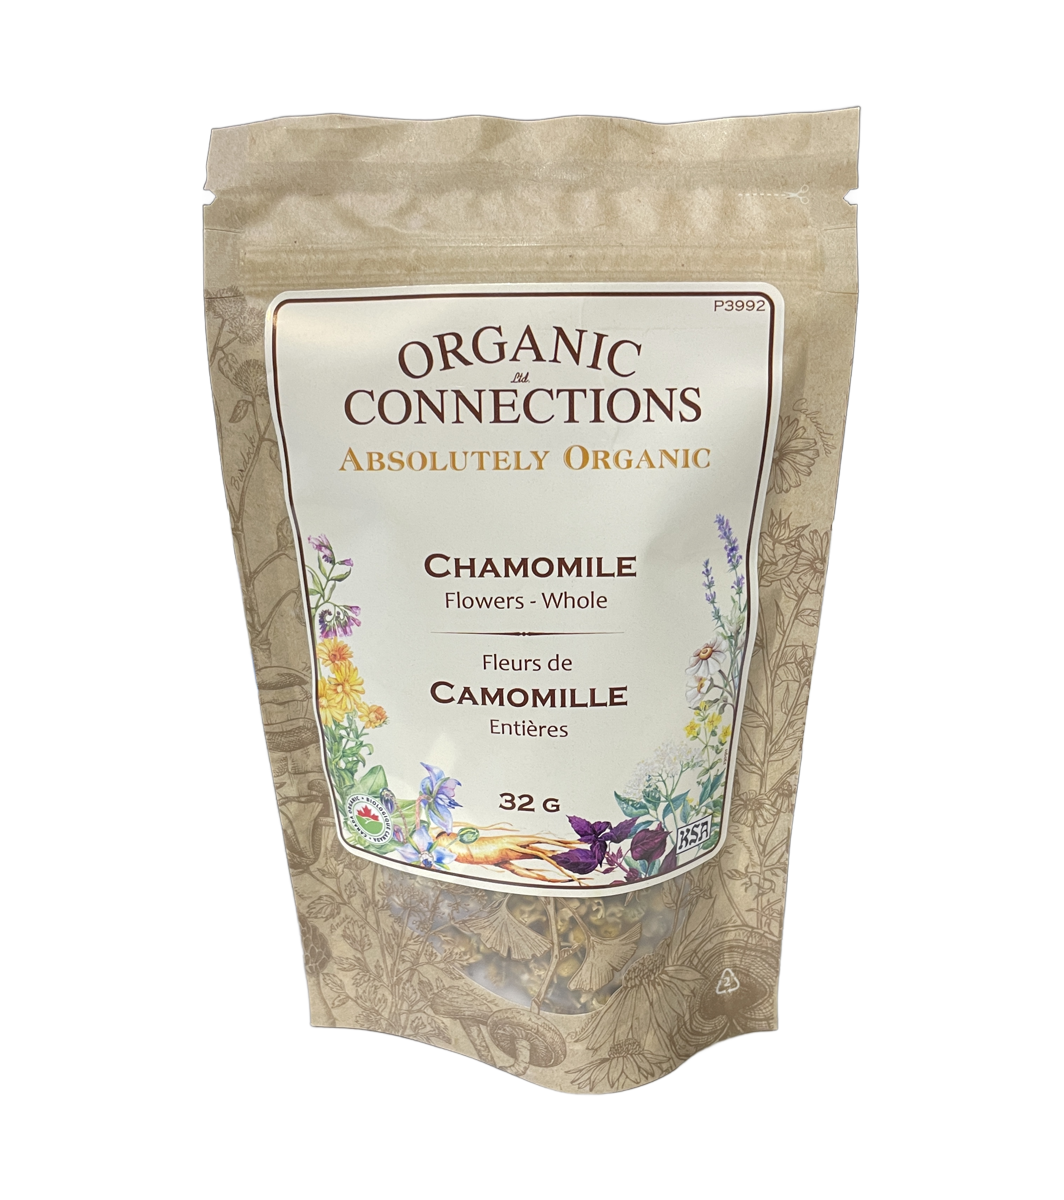 Organic Connections Organic Chamomile Flowers Whole 32g